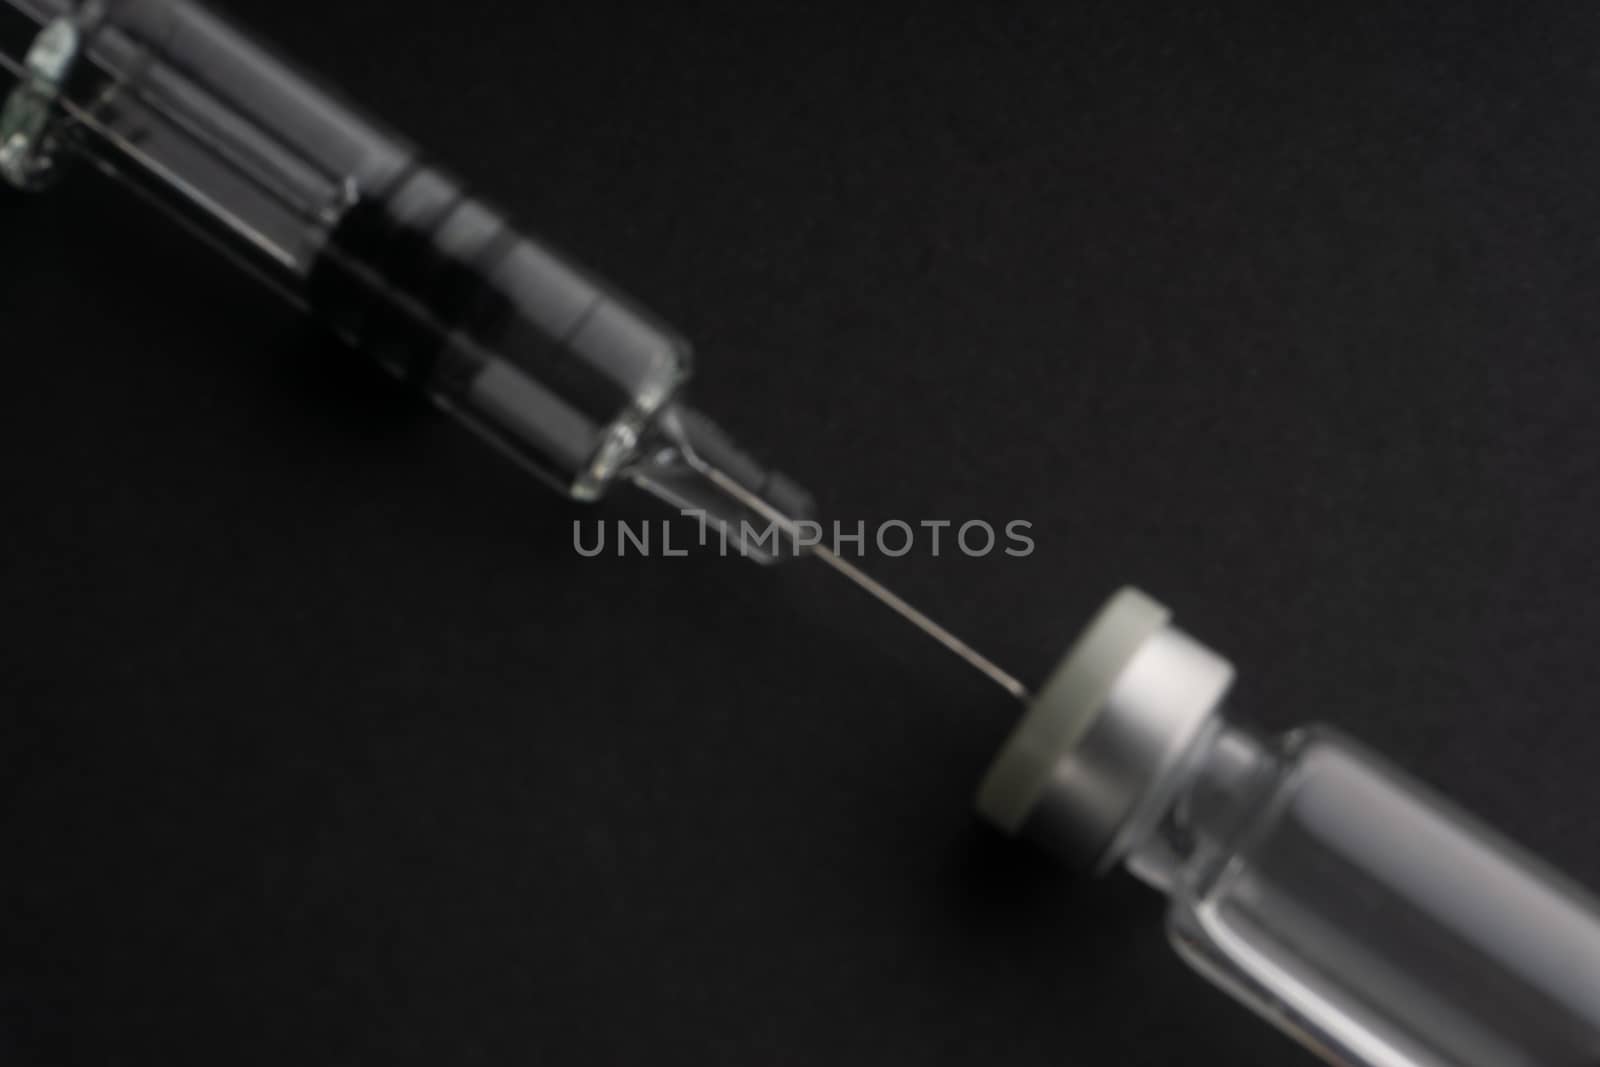 Closeup blurry image of syringe and vials on black background by silverwings